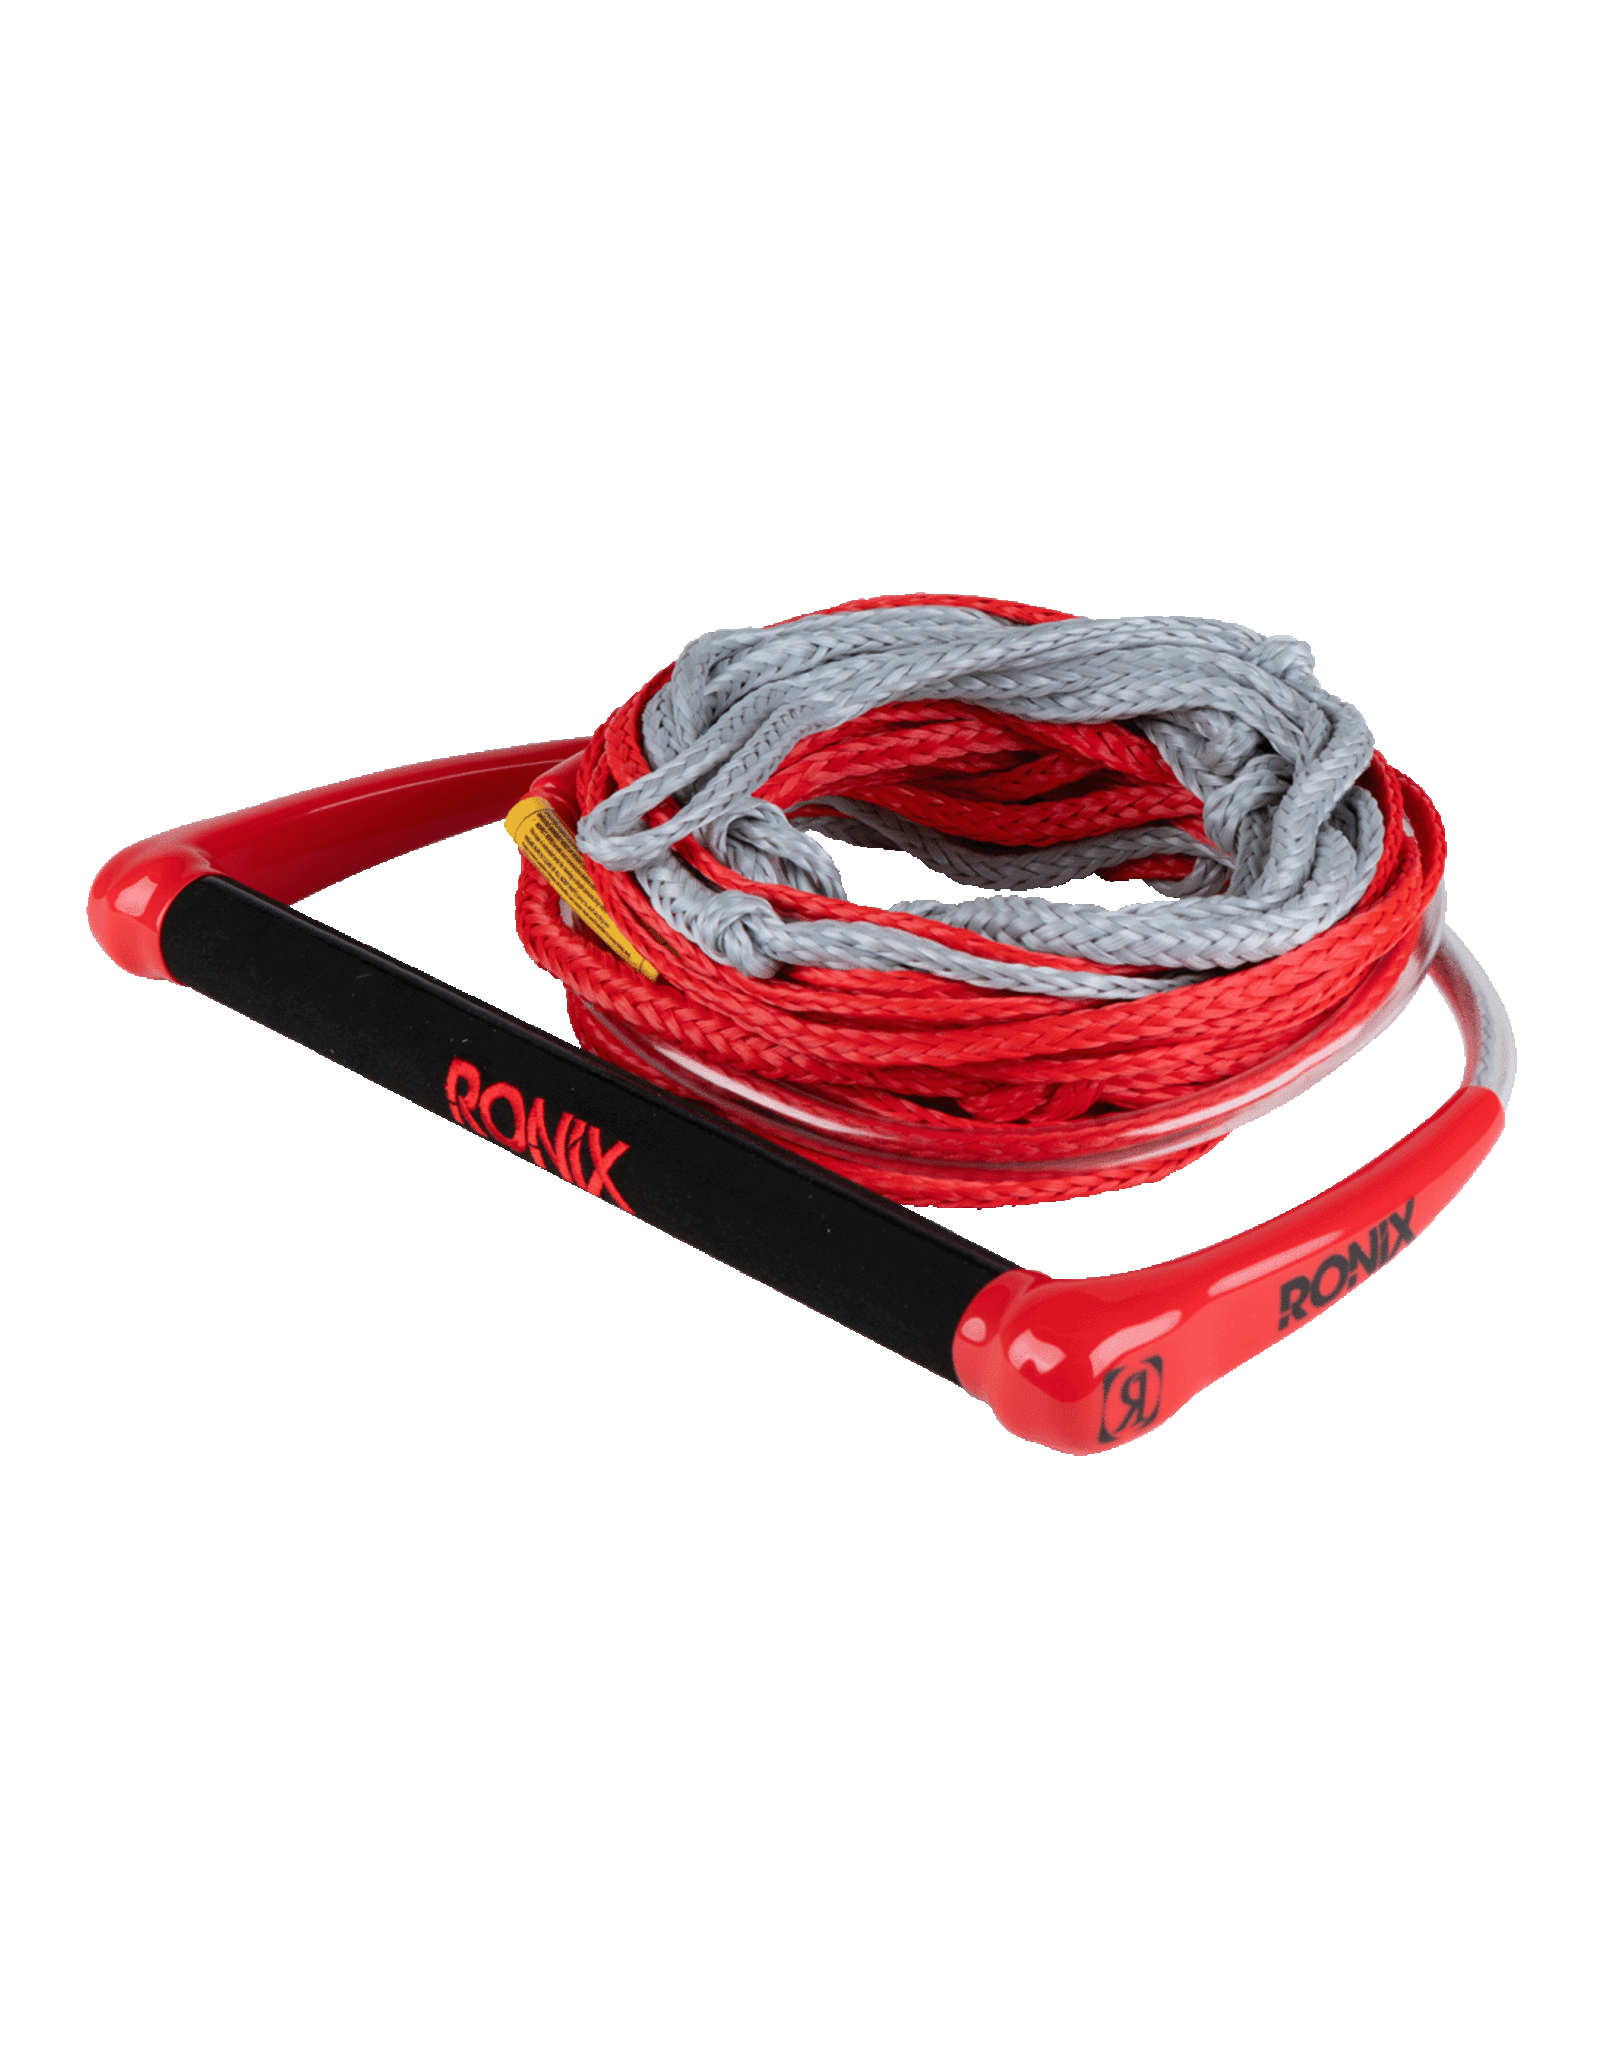 RONIX ROPE RONIX COMBO 2.0 RED/GREY 65FT LENGTH 1.5IN HANDLE DIA.